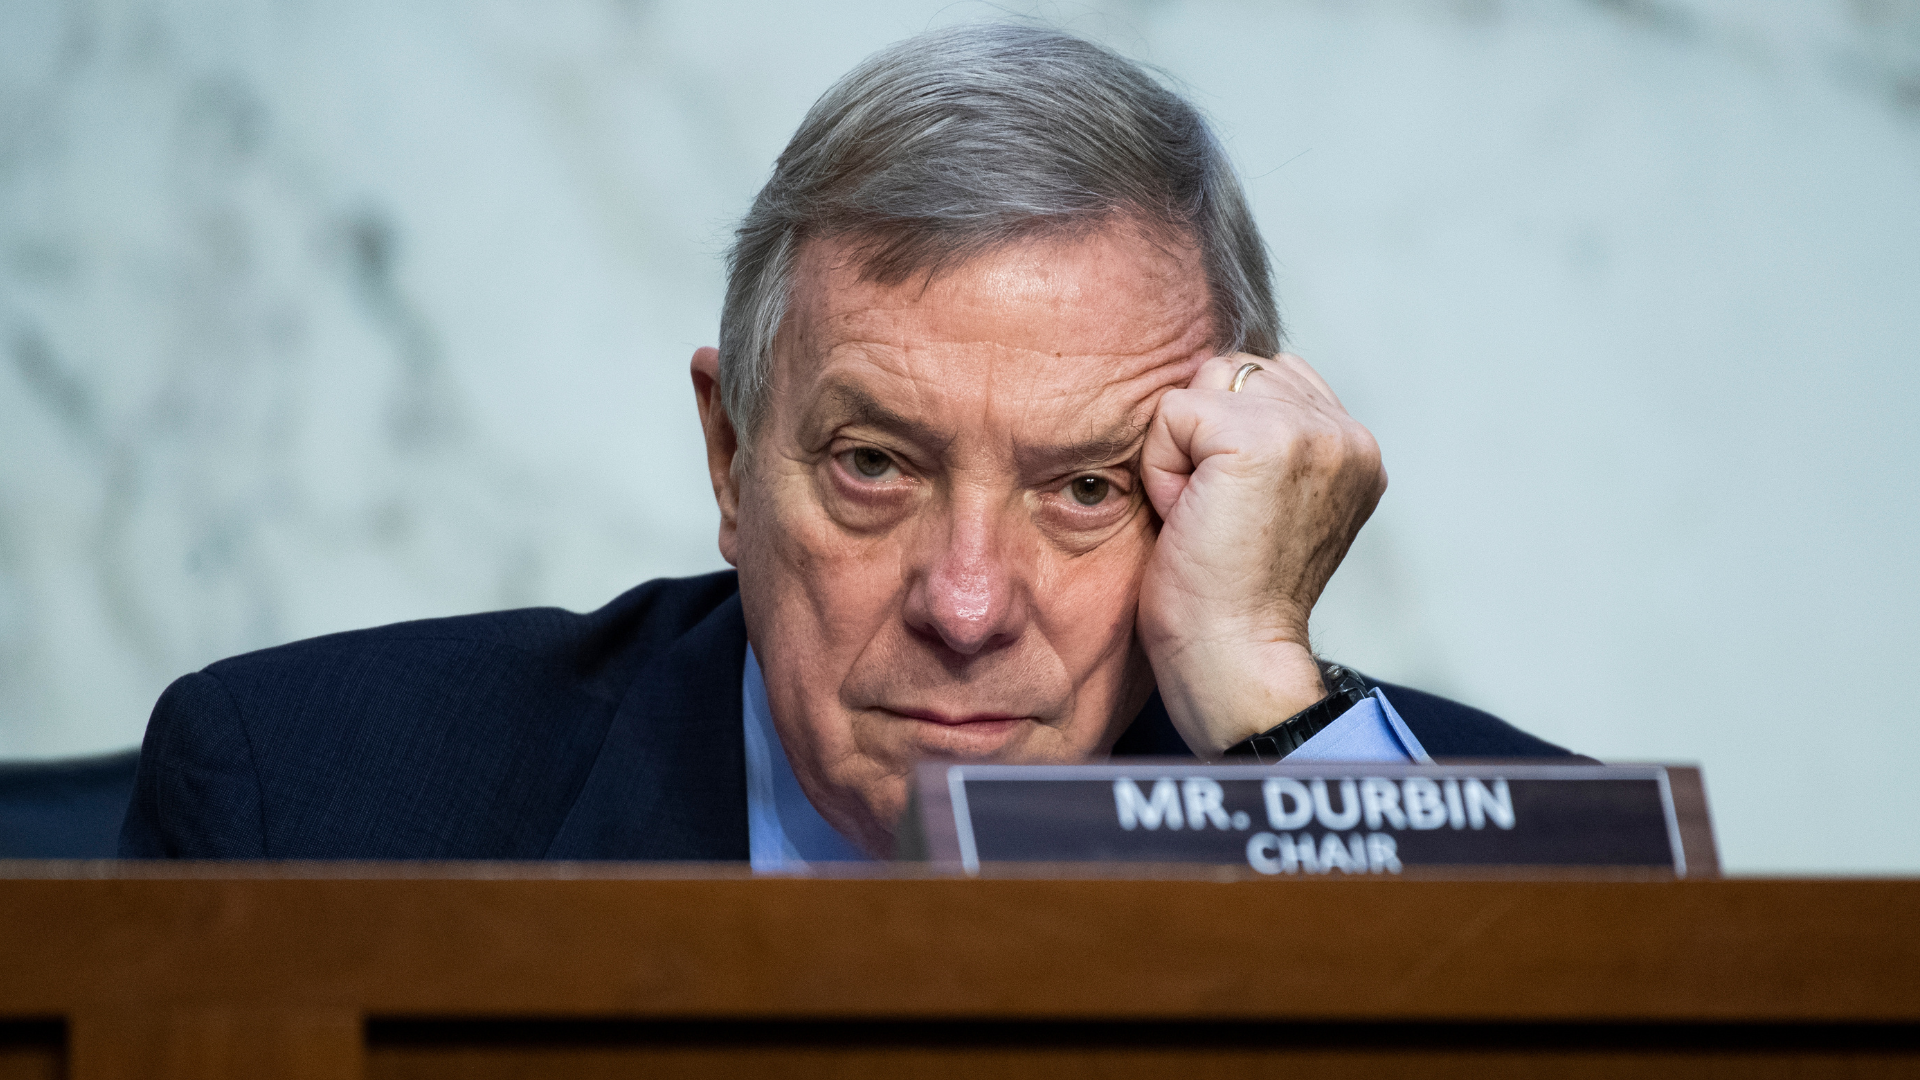 Dick Durbin, who was fully vaccinated, contracts COVID for the third time this year.